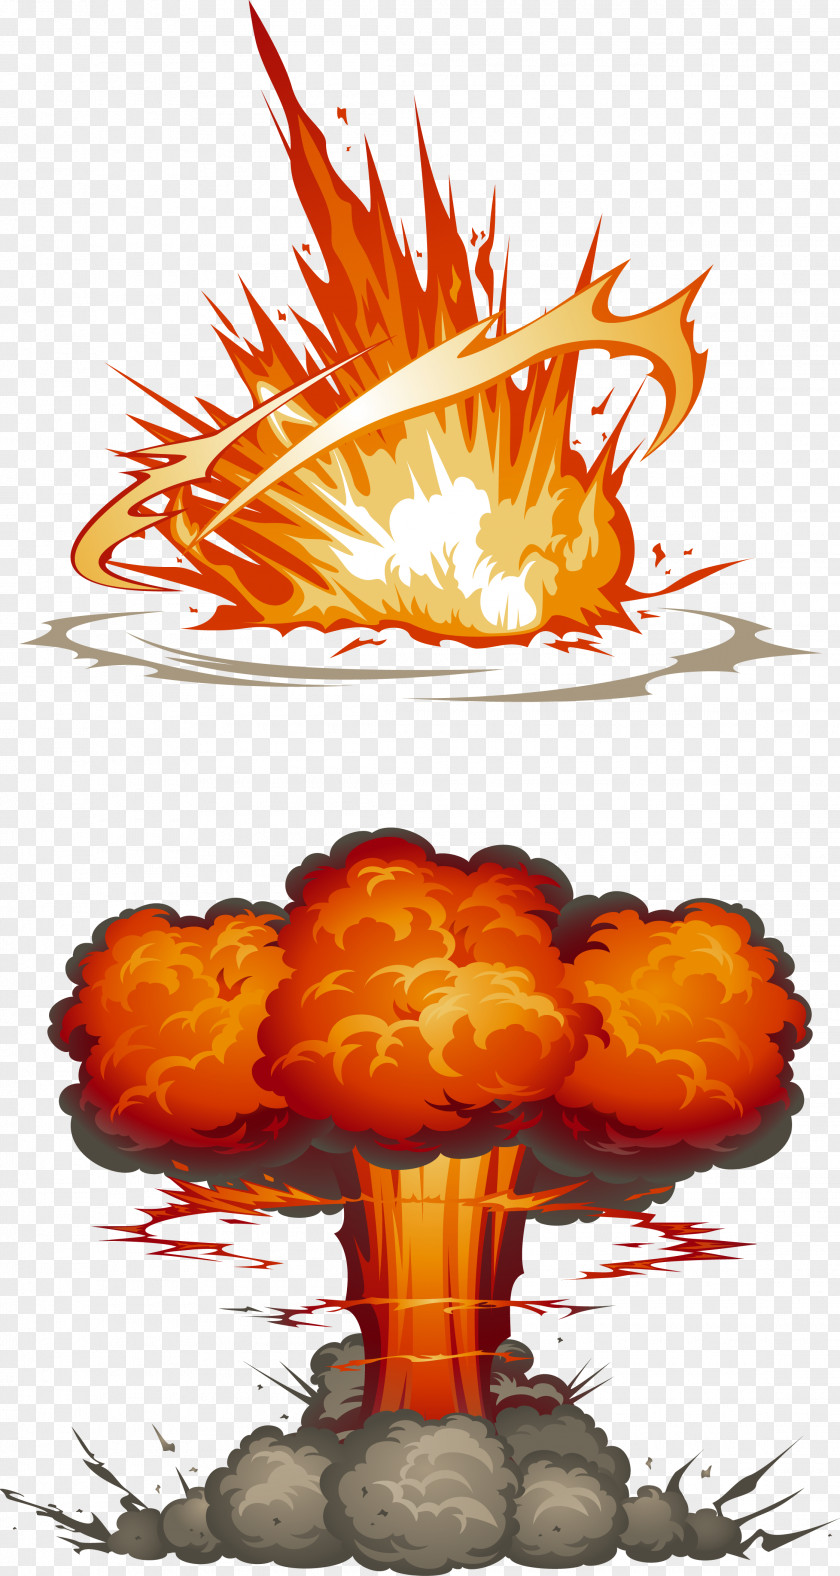 Explosions Explosion Download PNG